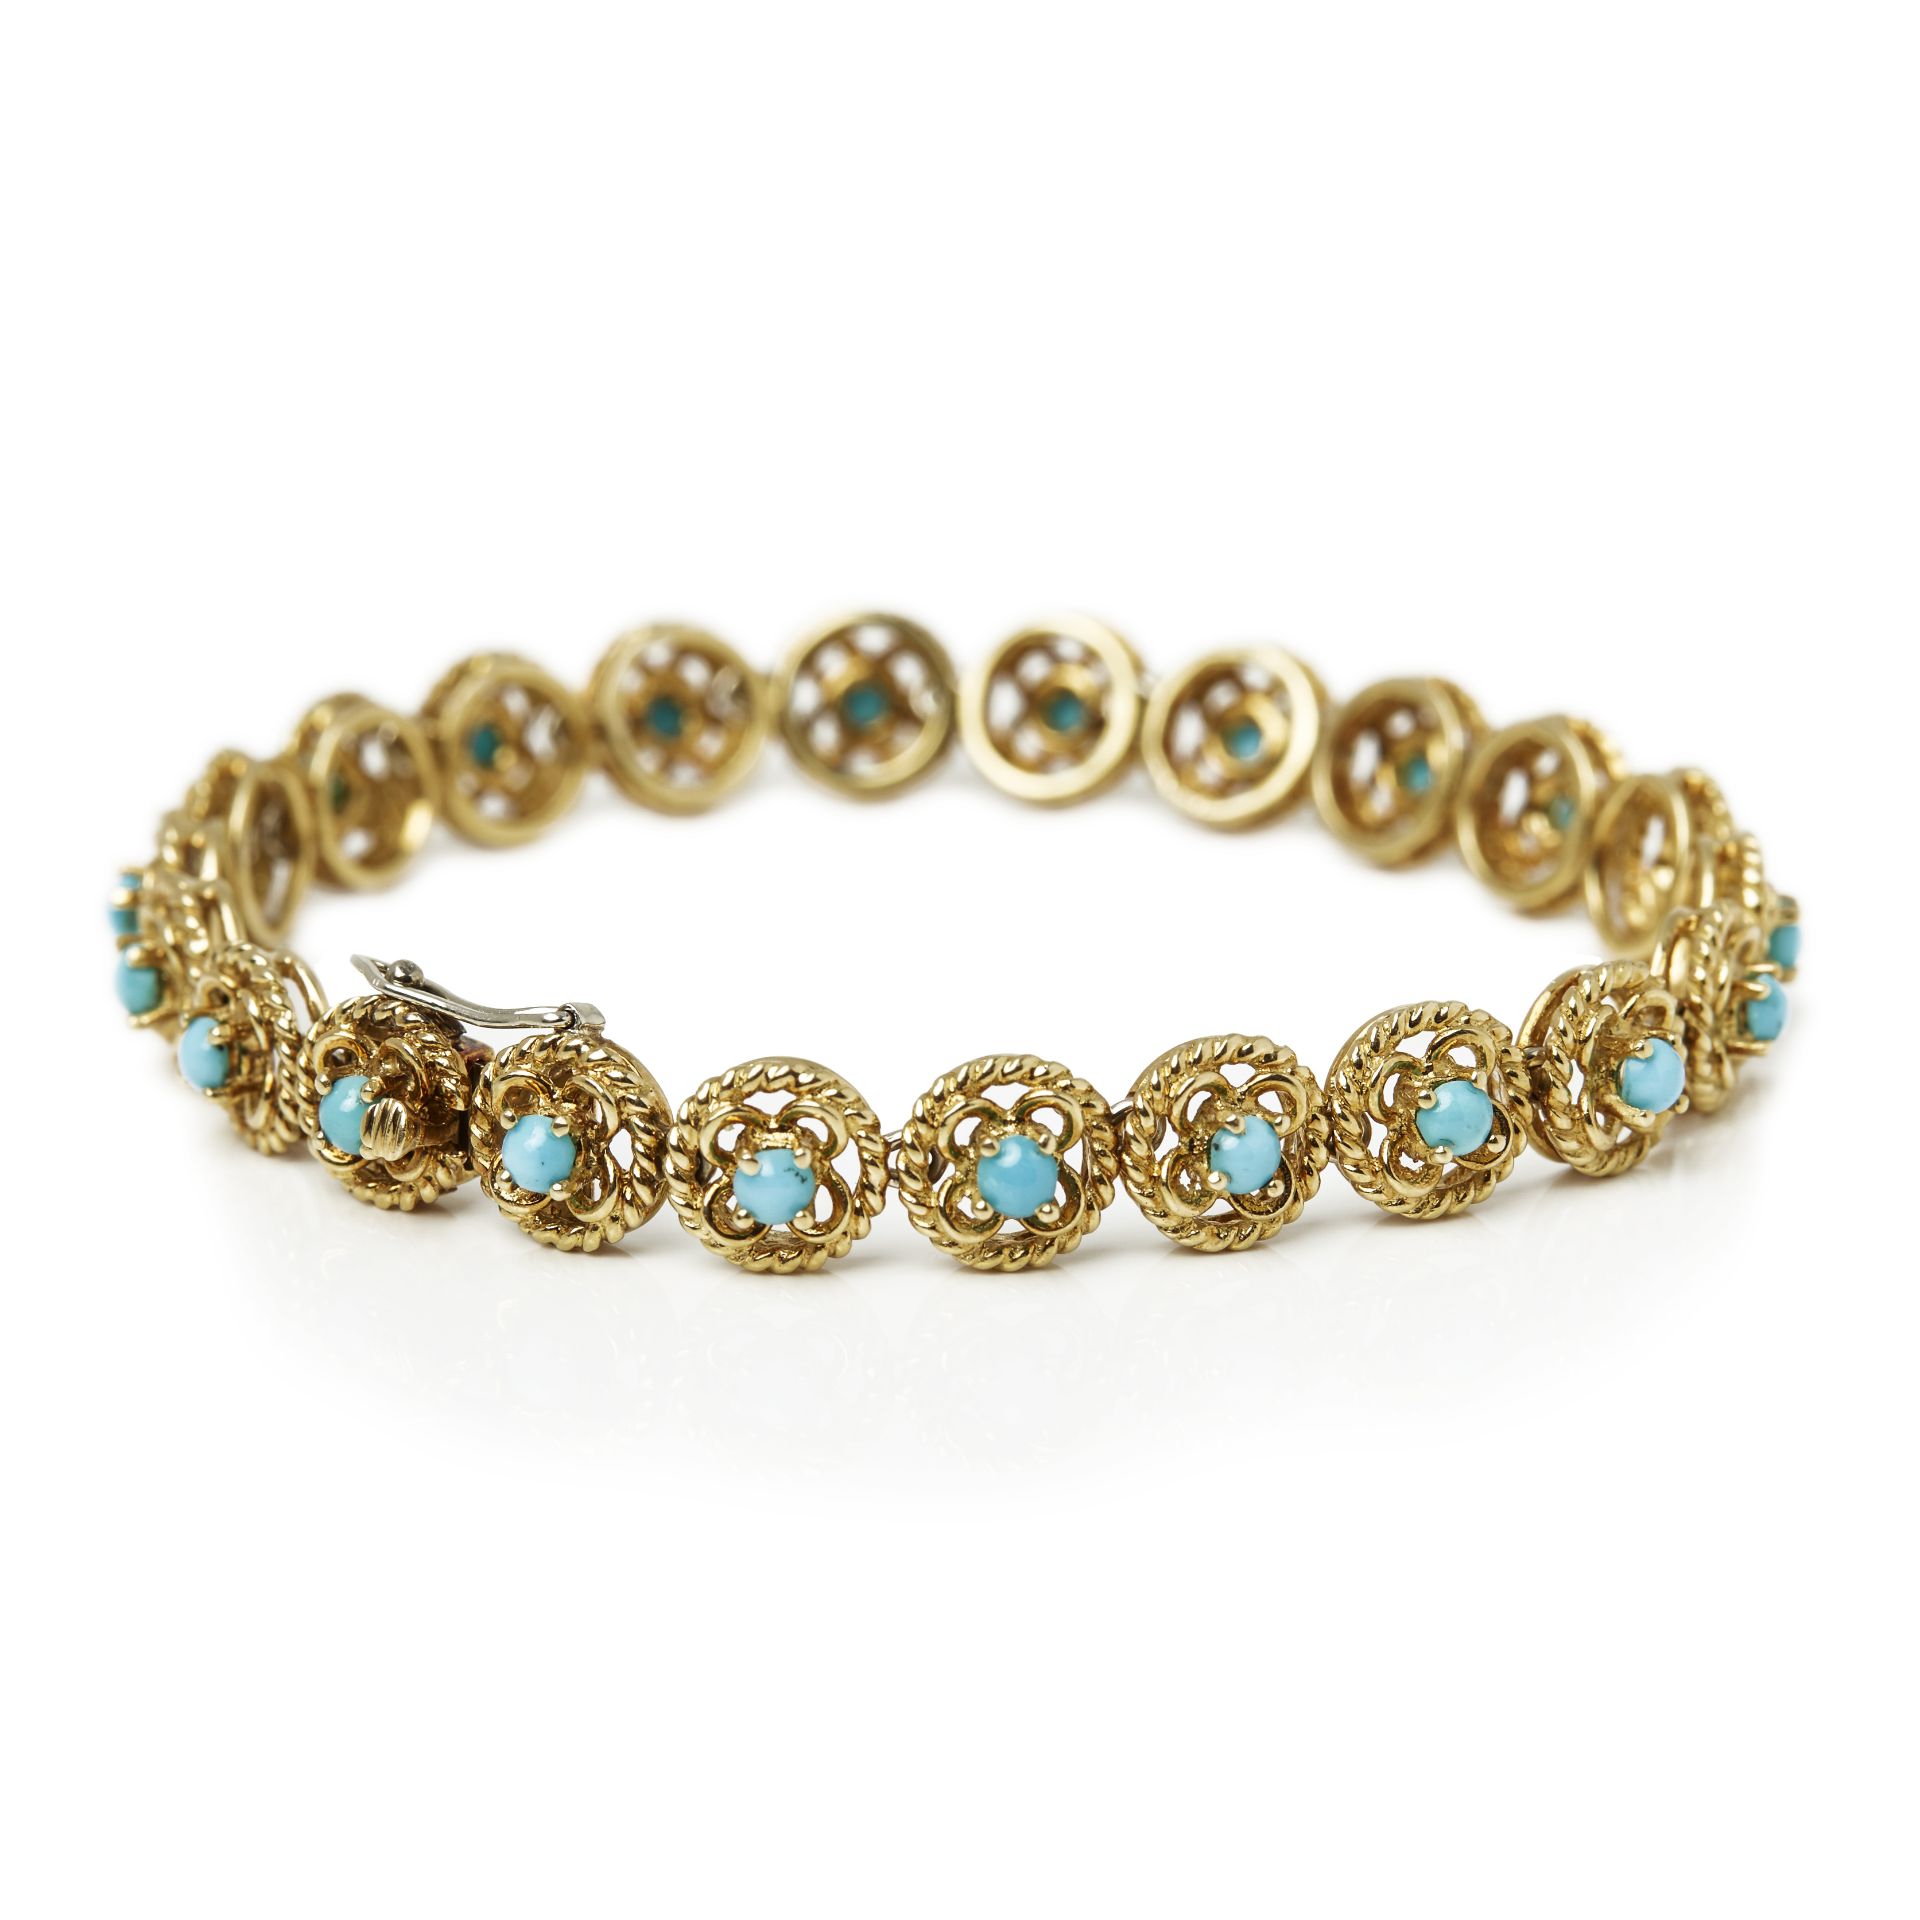 Cartier 18k Yellow Gold Turquoise Bracelet - Image 3 of 9